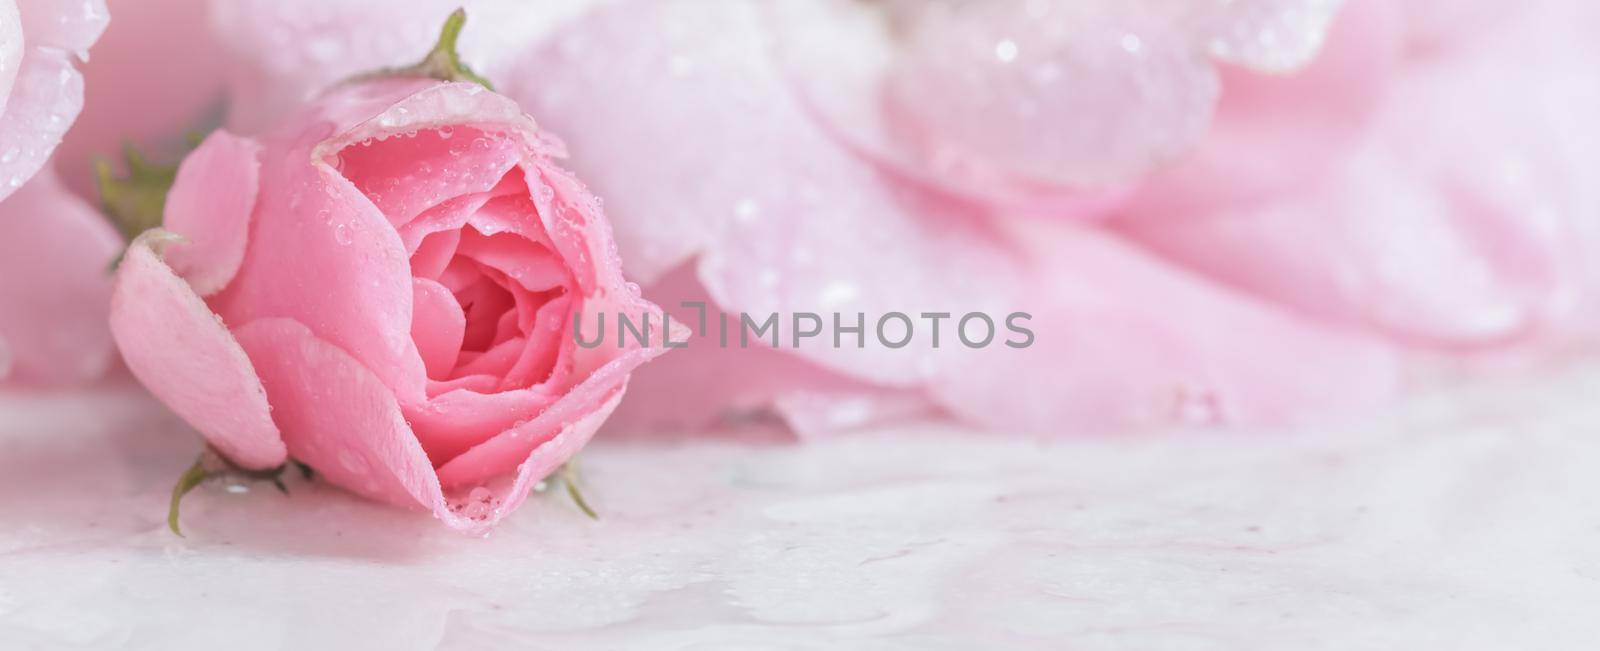 Beautiful pink rose with water drops on white marble. Can be used as background. Soft focus. Romantic style by Olayola